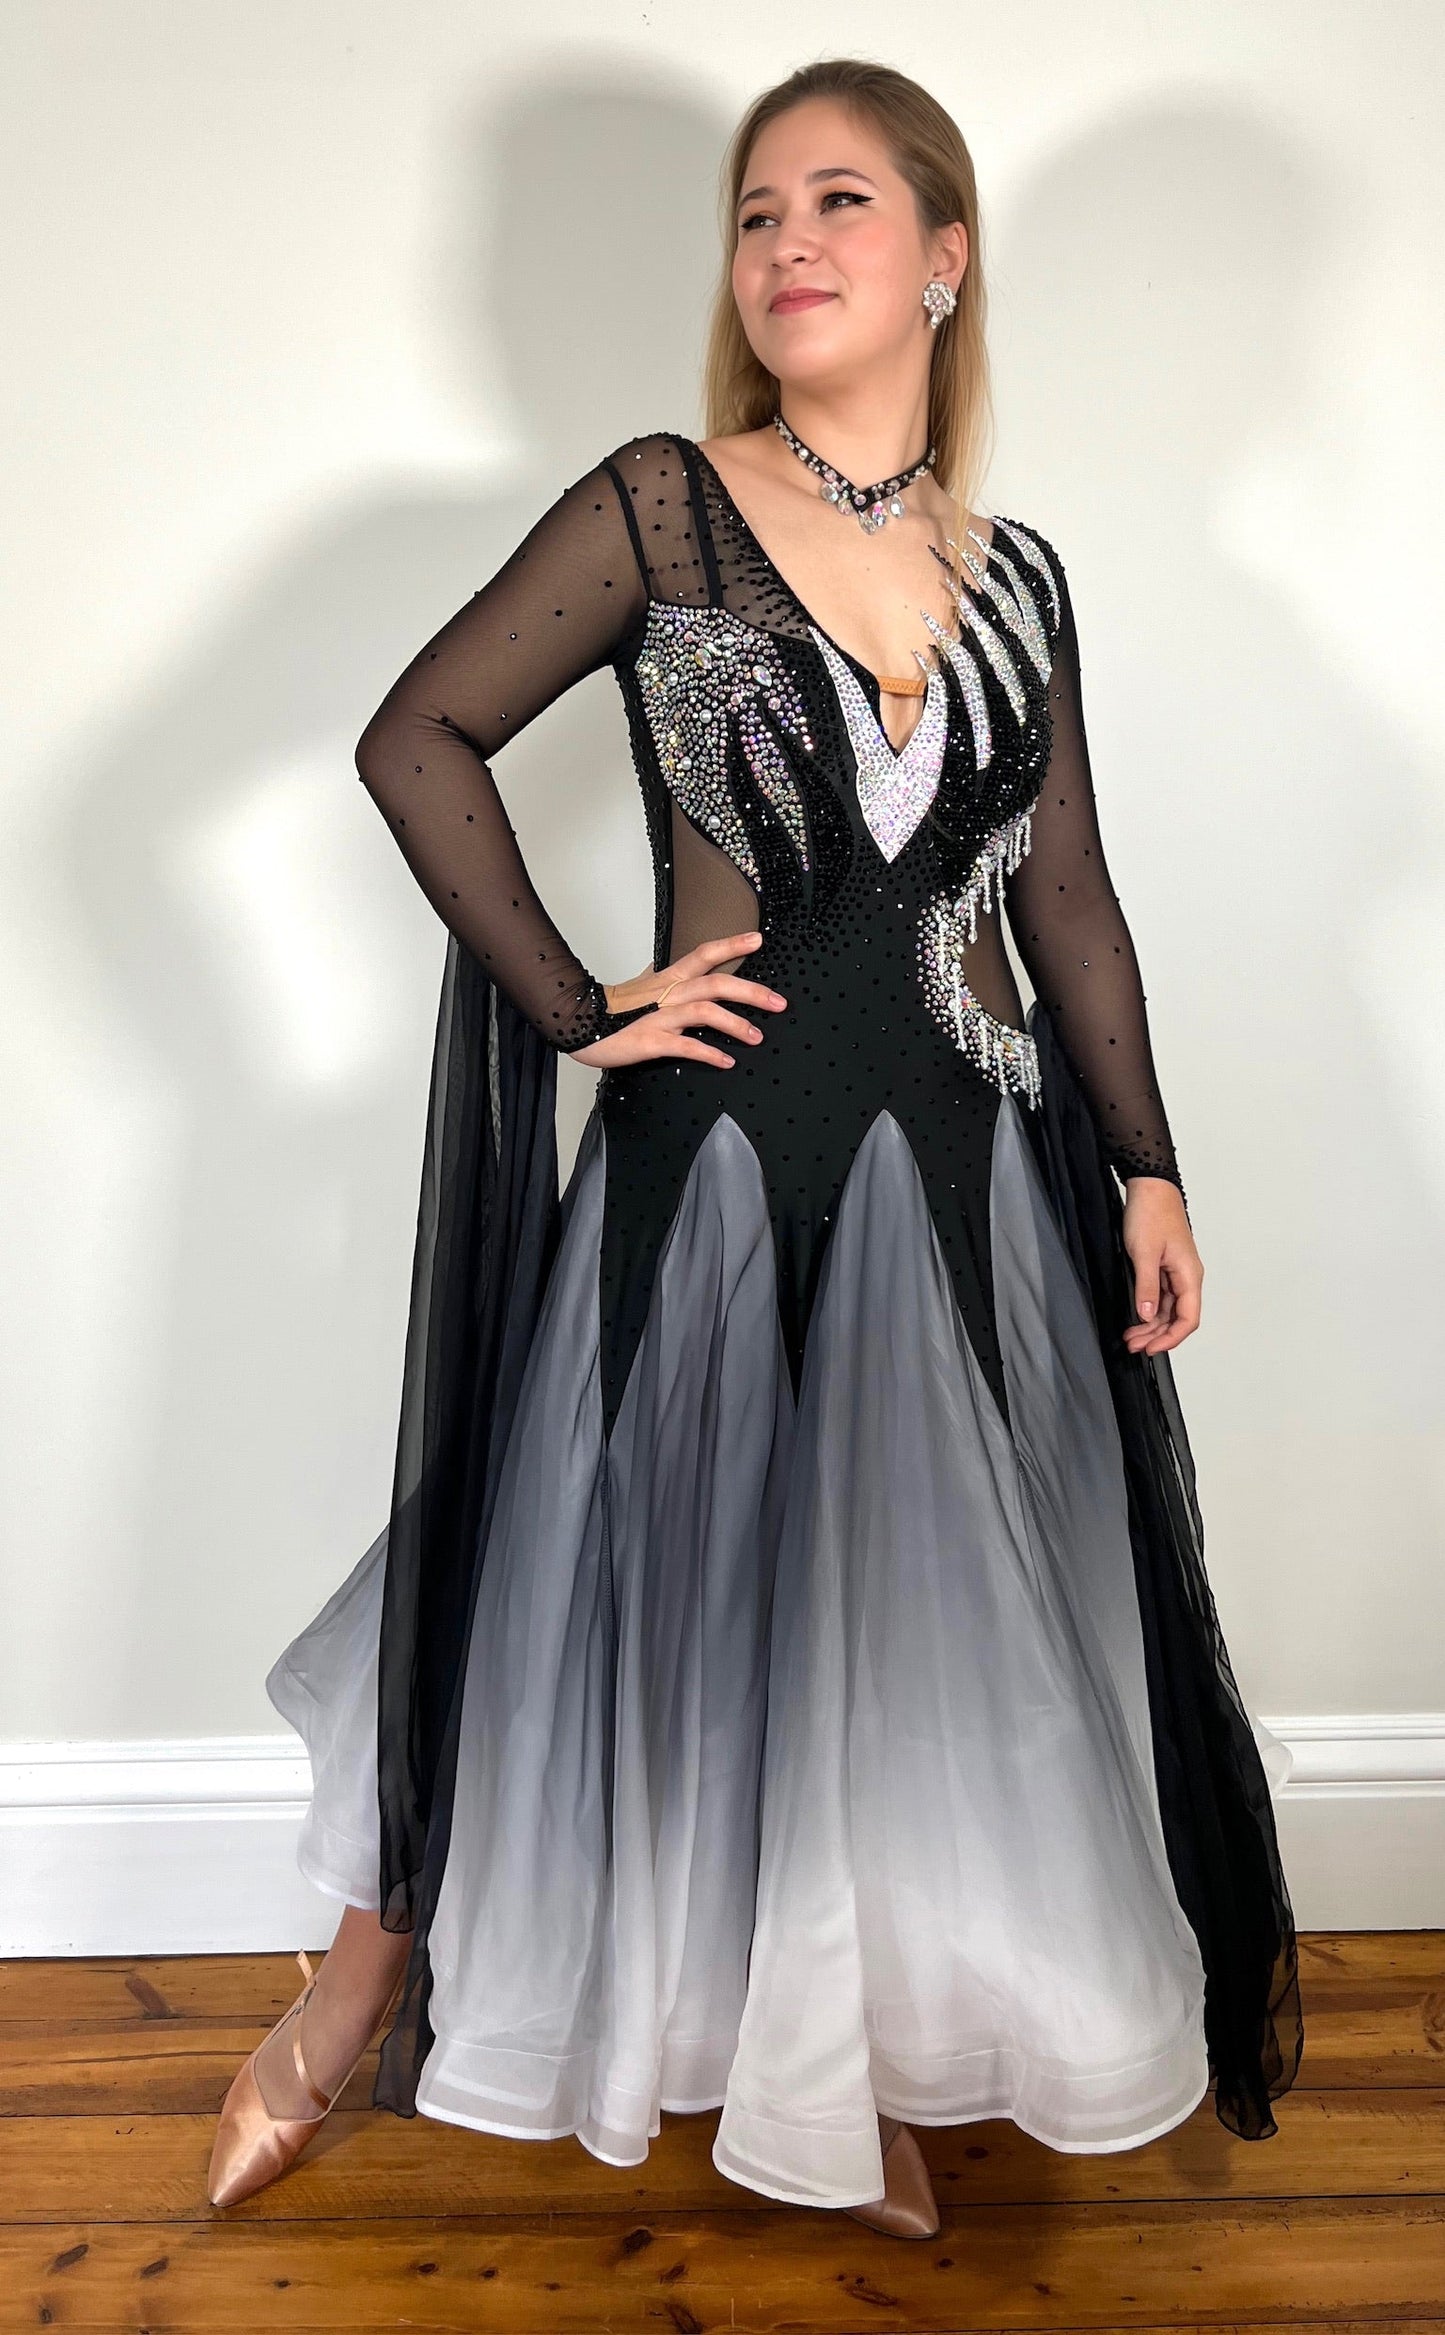 331 White & Black Ombré Ballroom Dress. Detailing to the chest and back. Decorated in Jet and AB stones with floats from the lower arm.